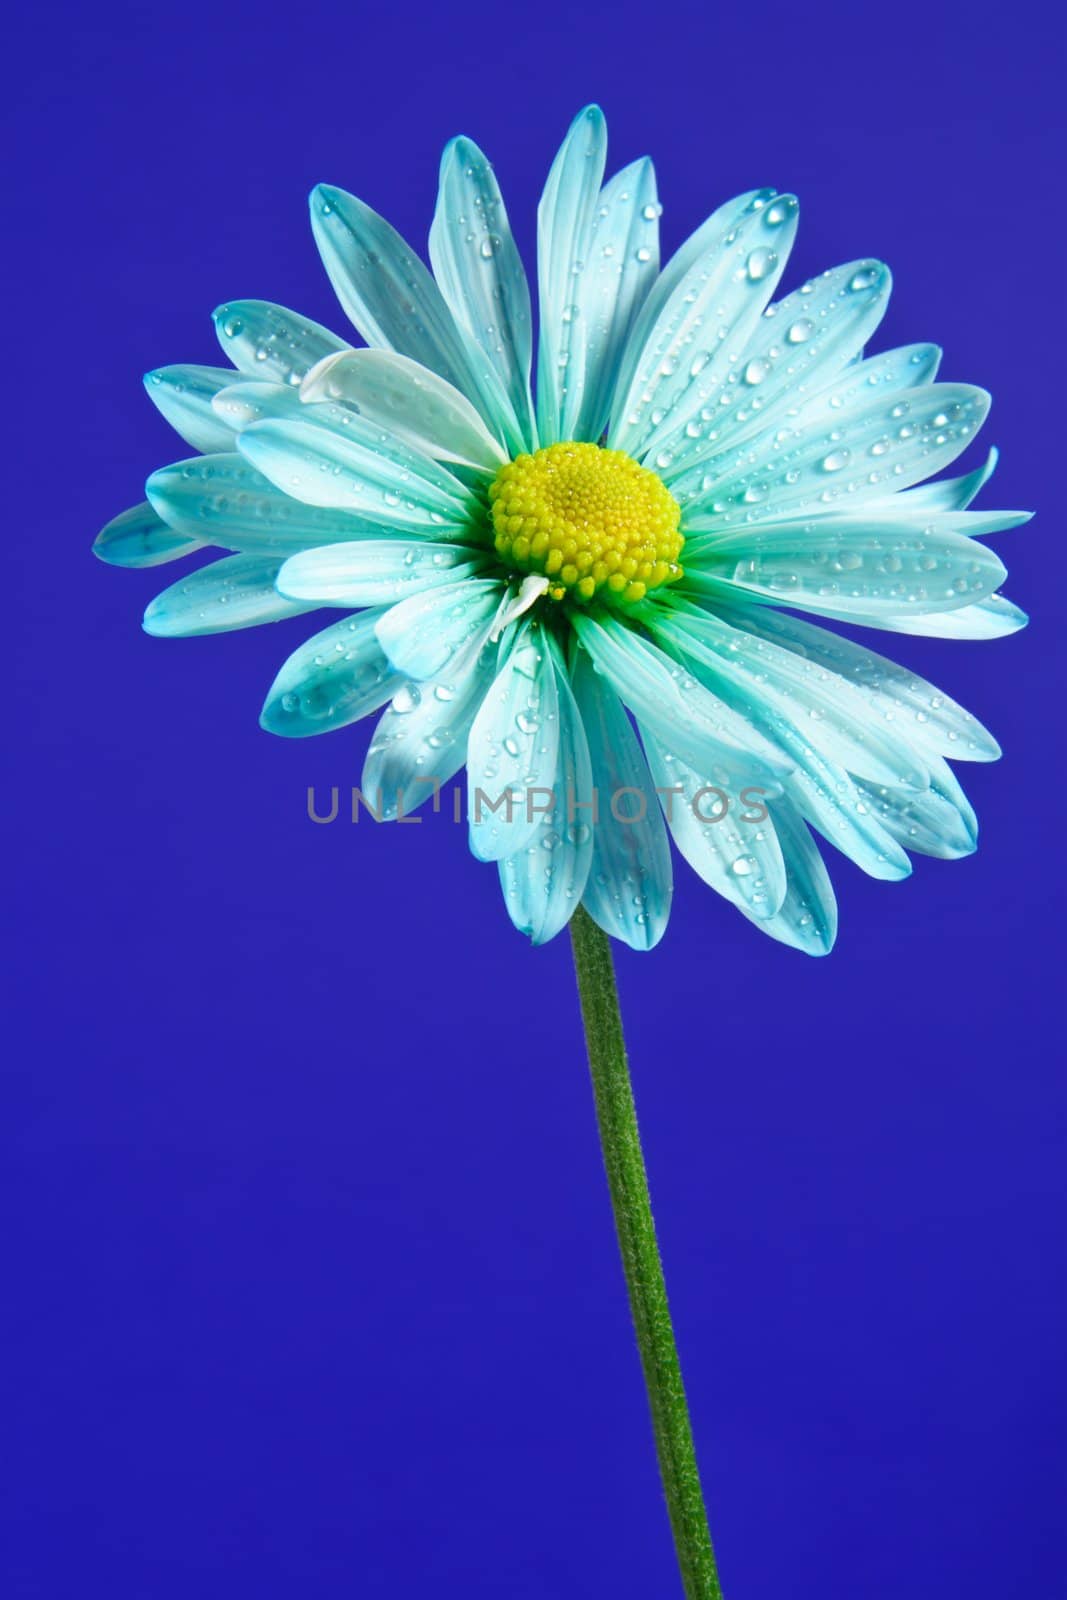 daisy with waterdrops, on blue background